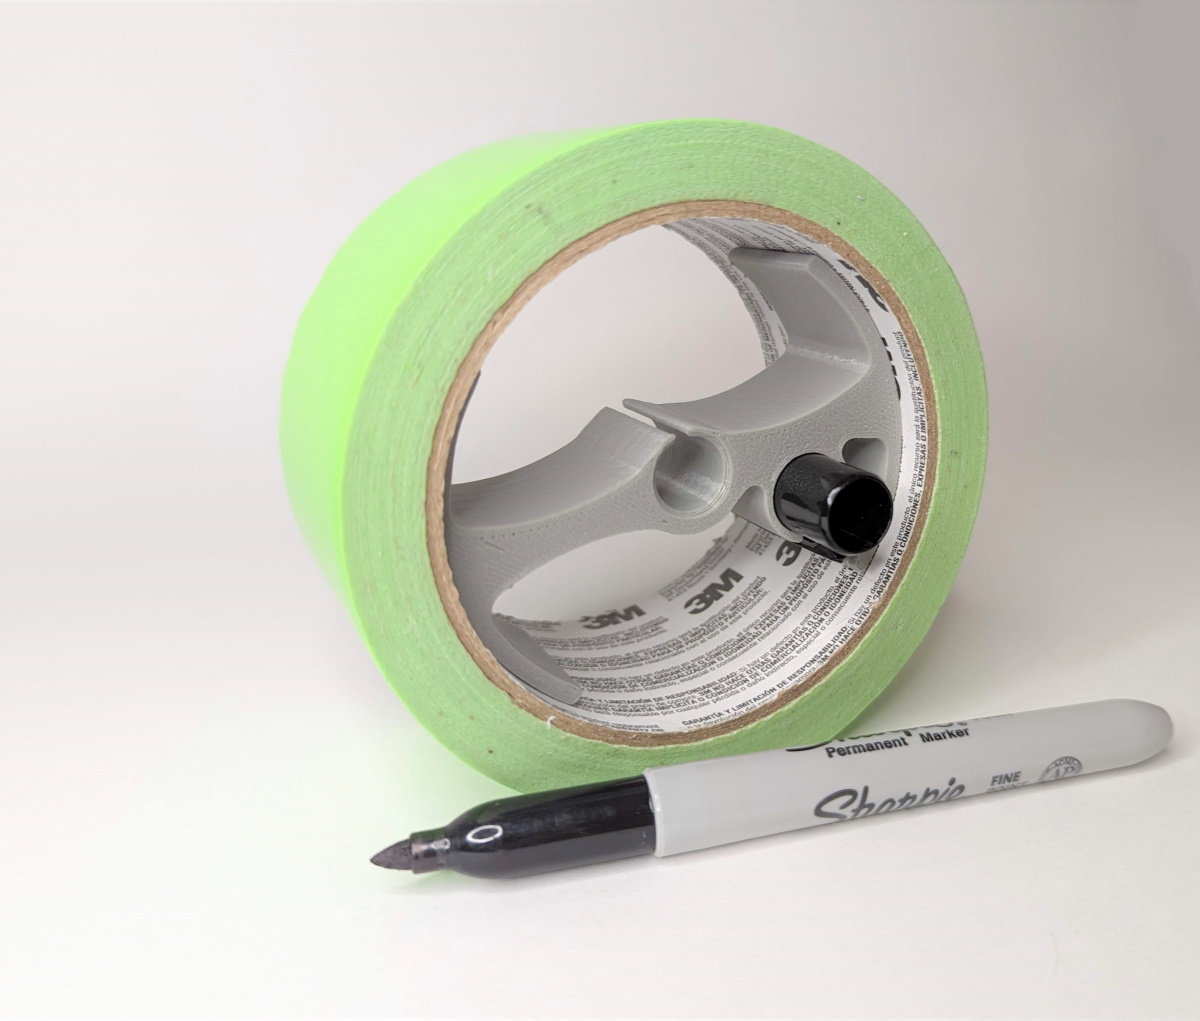 Sharpie Holder for Double Sided Tape by Ken Mills